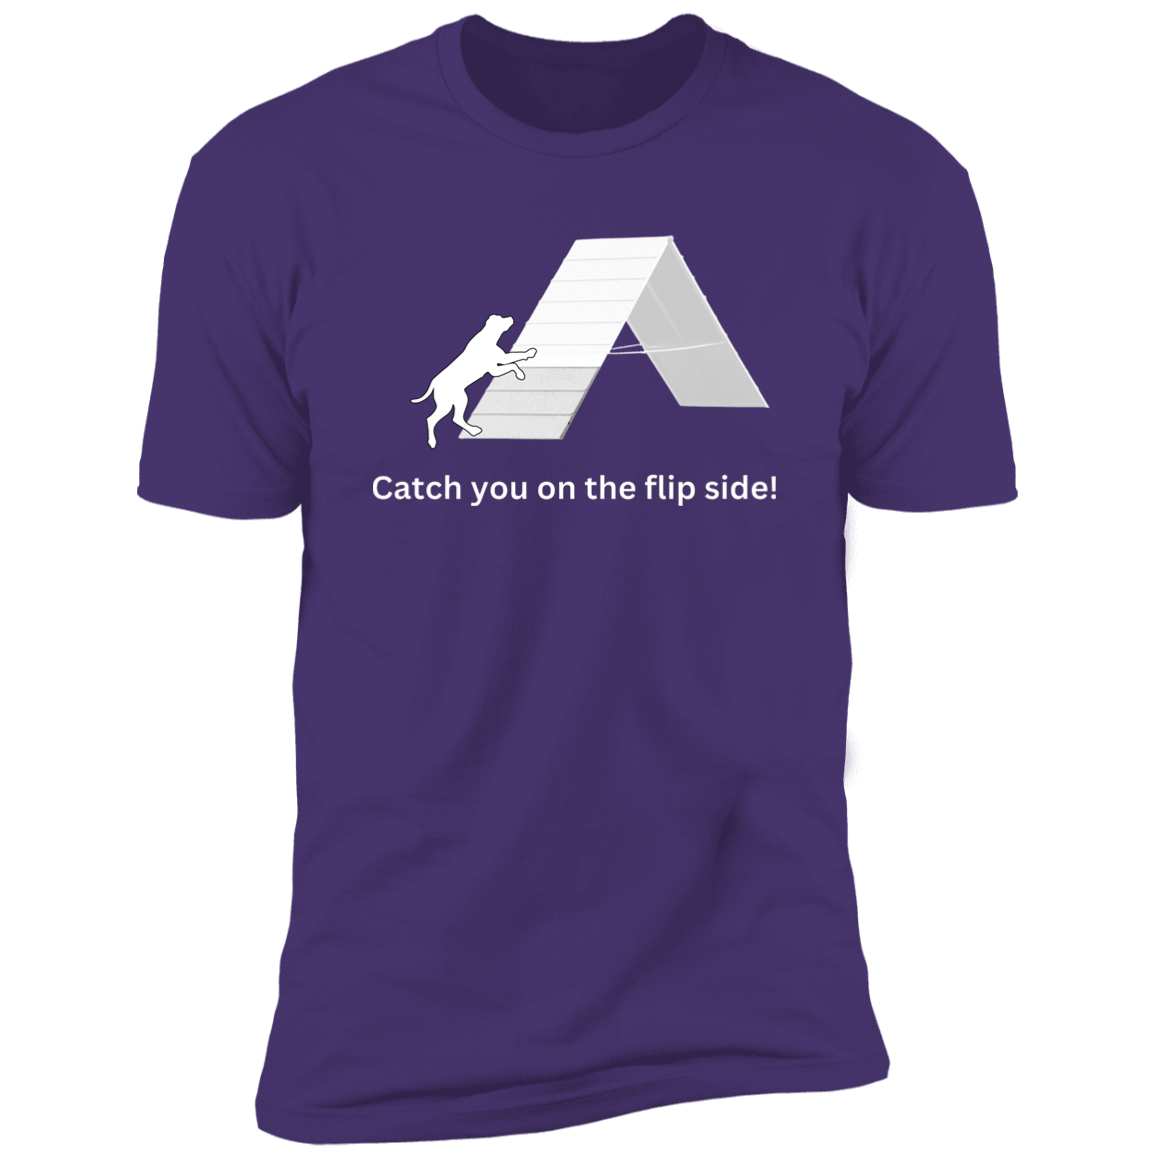 Catch You on the Flip Side T-shirt, Dog Agility Shirt for humans, in purple rush